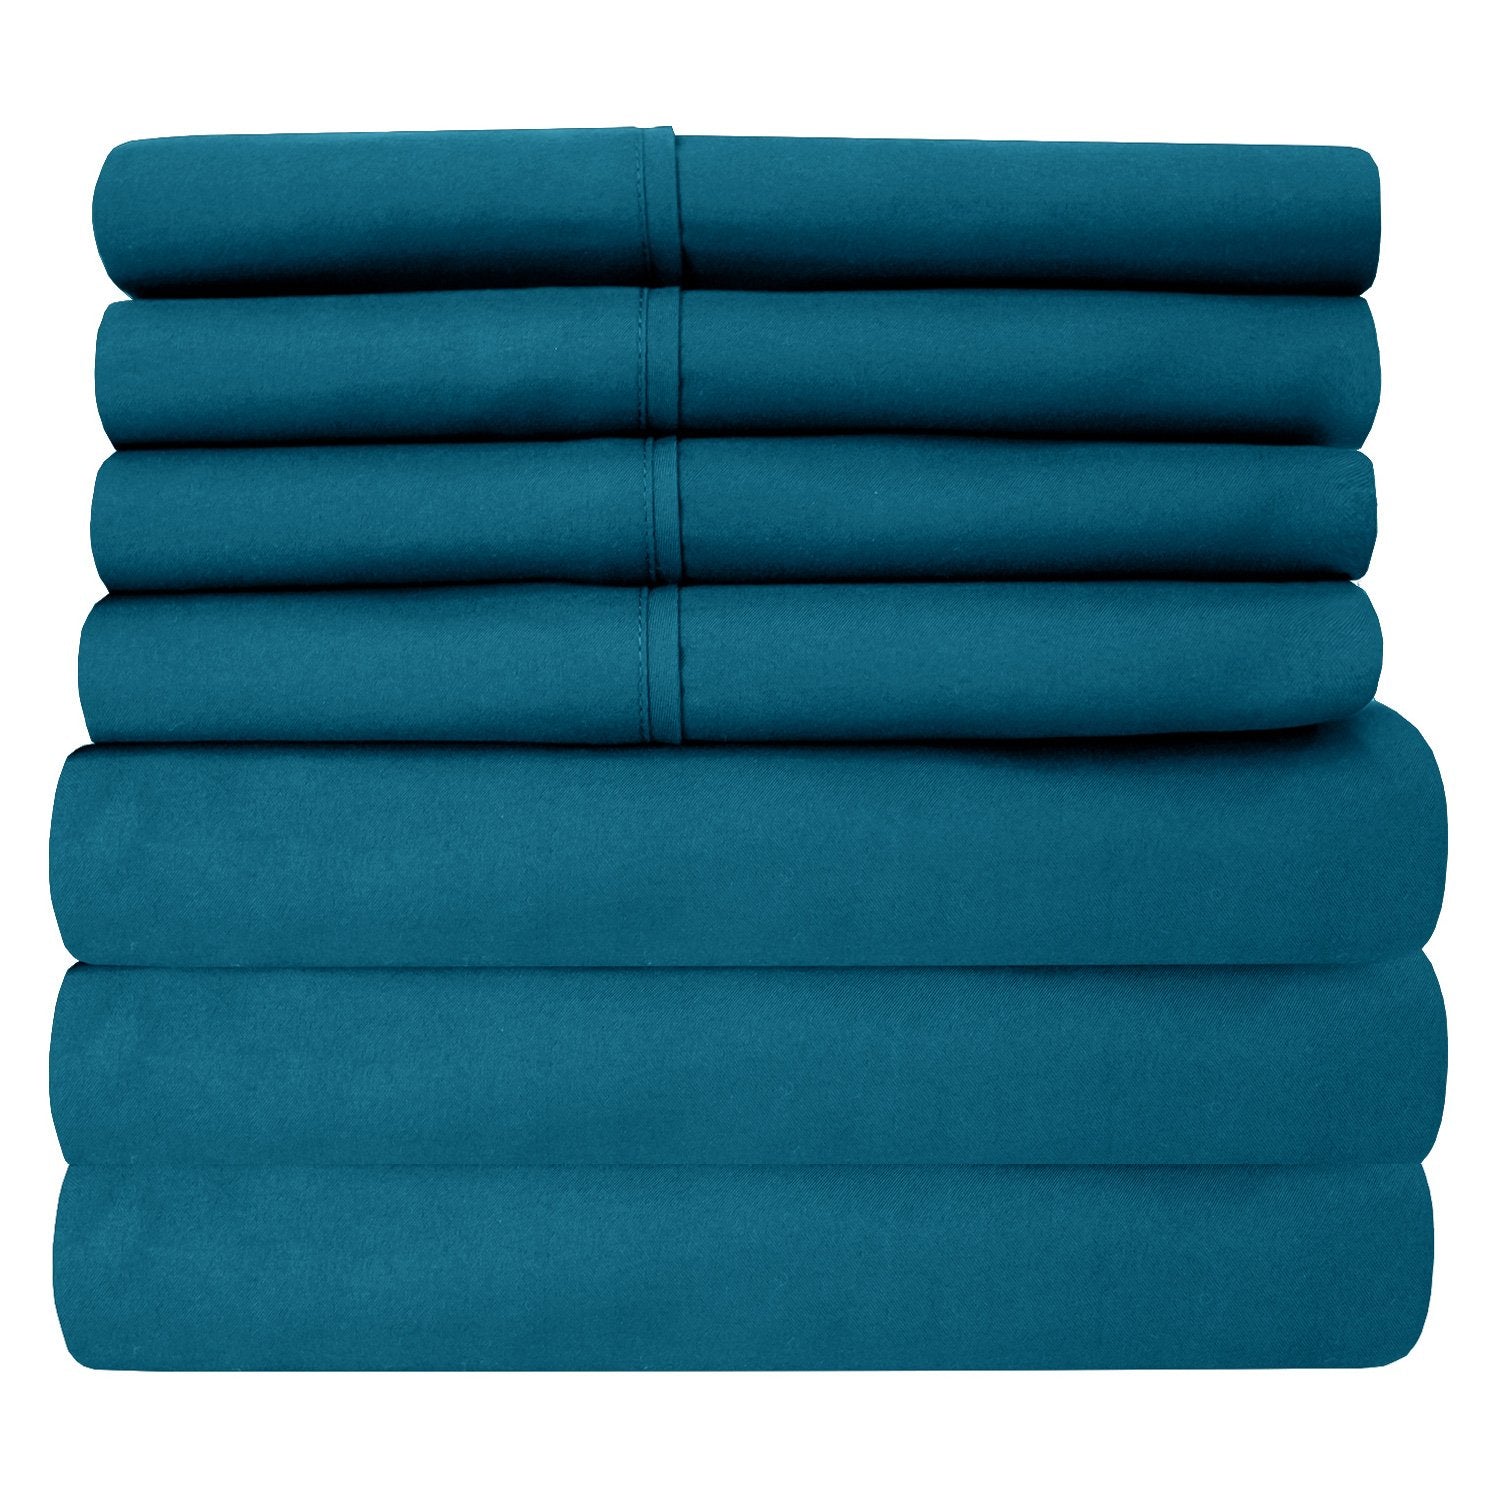 Deluxe 6-Piece Bed Sheet Set (Teal) - Folded 2